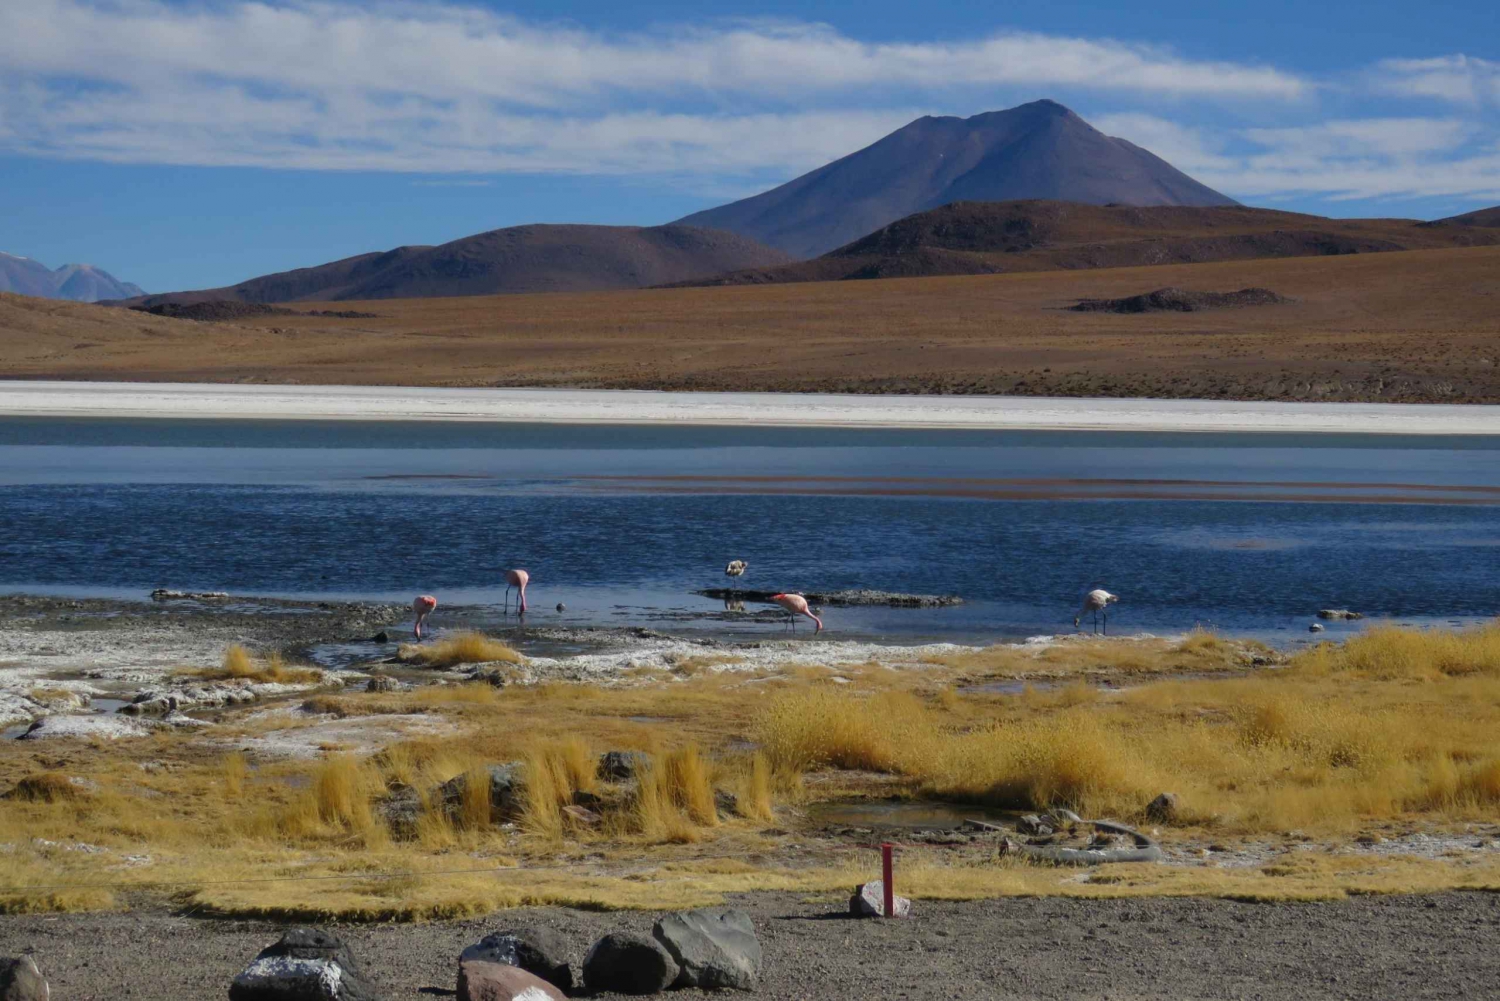 La Paz: 5-Day Uyuni Salt Flats by Bus with Private Hotels.